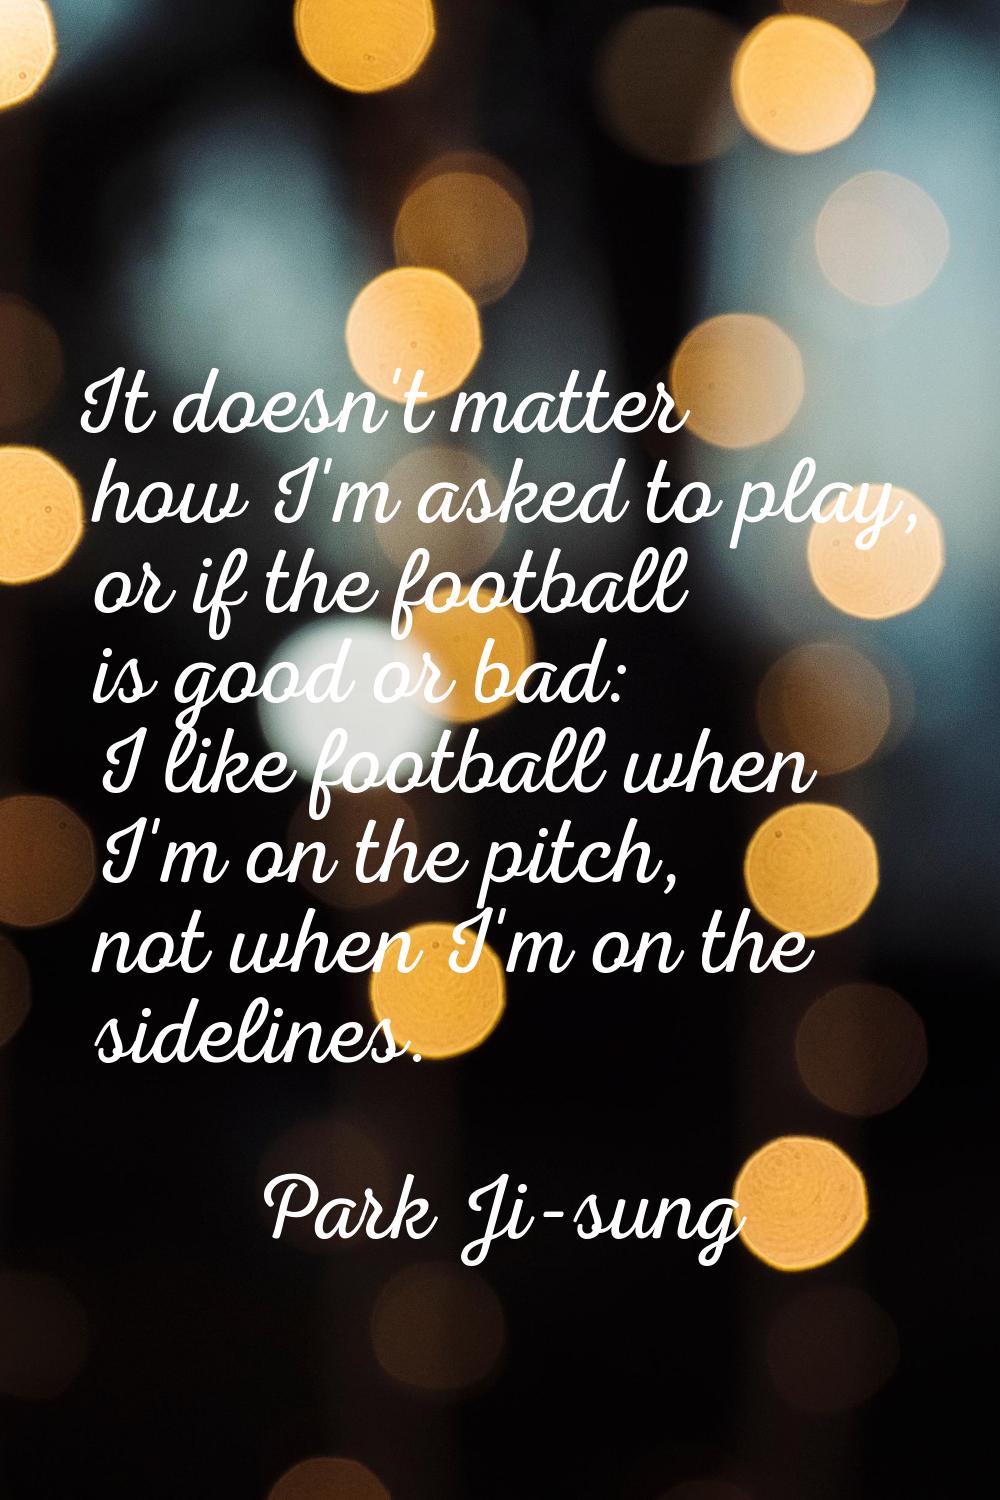 It doesn't matter how I'm asked to play, or if the football is good or bad: I like football when I'